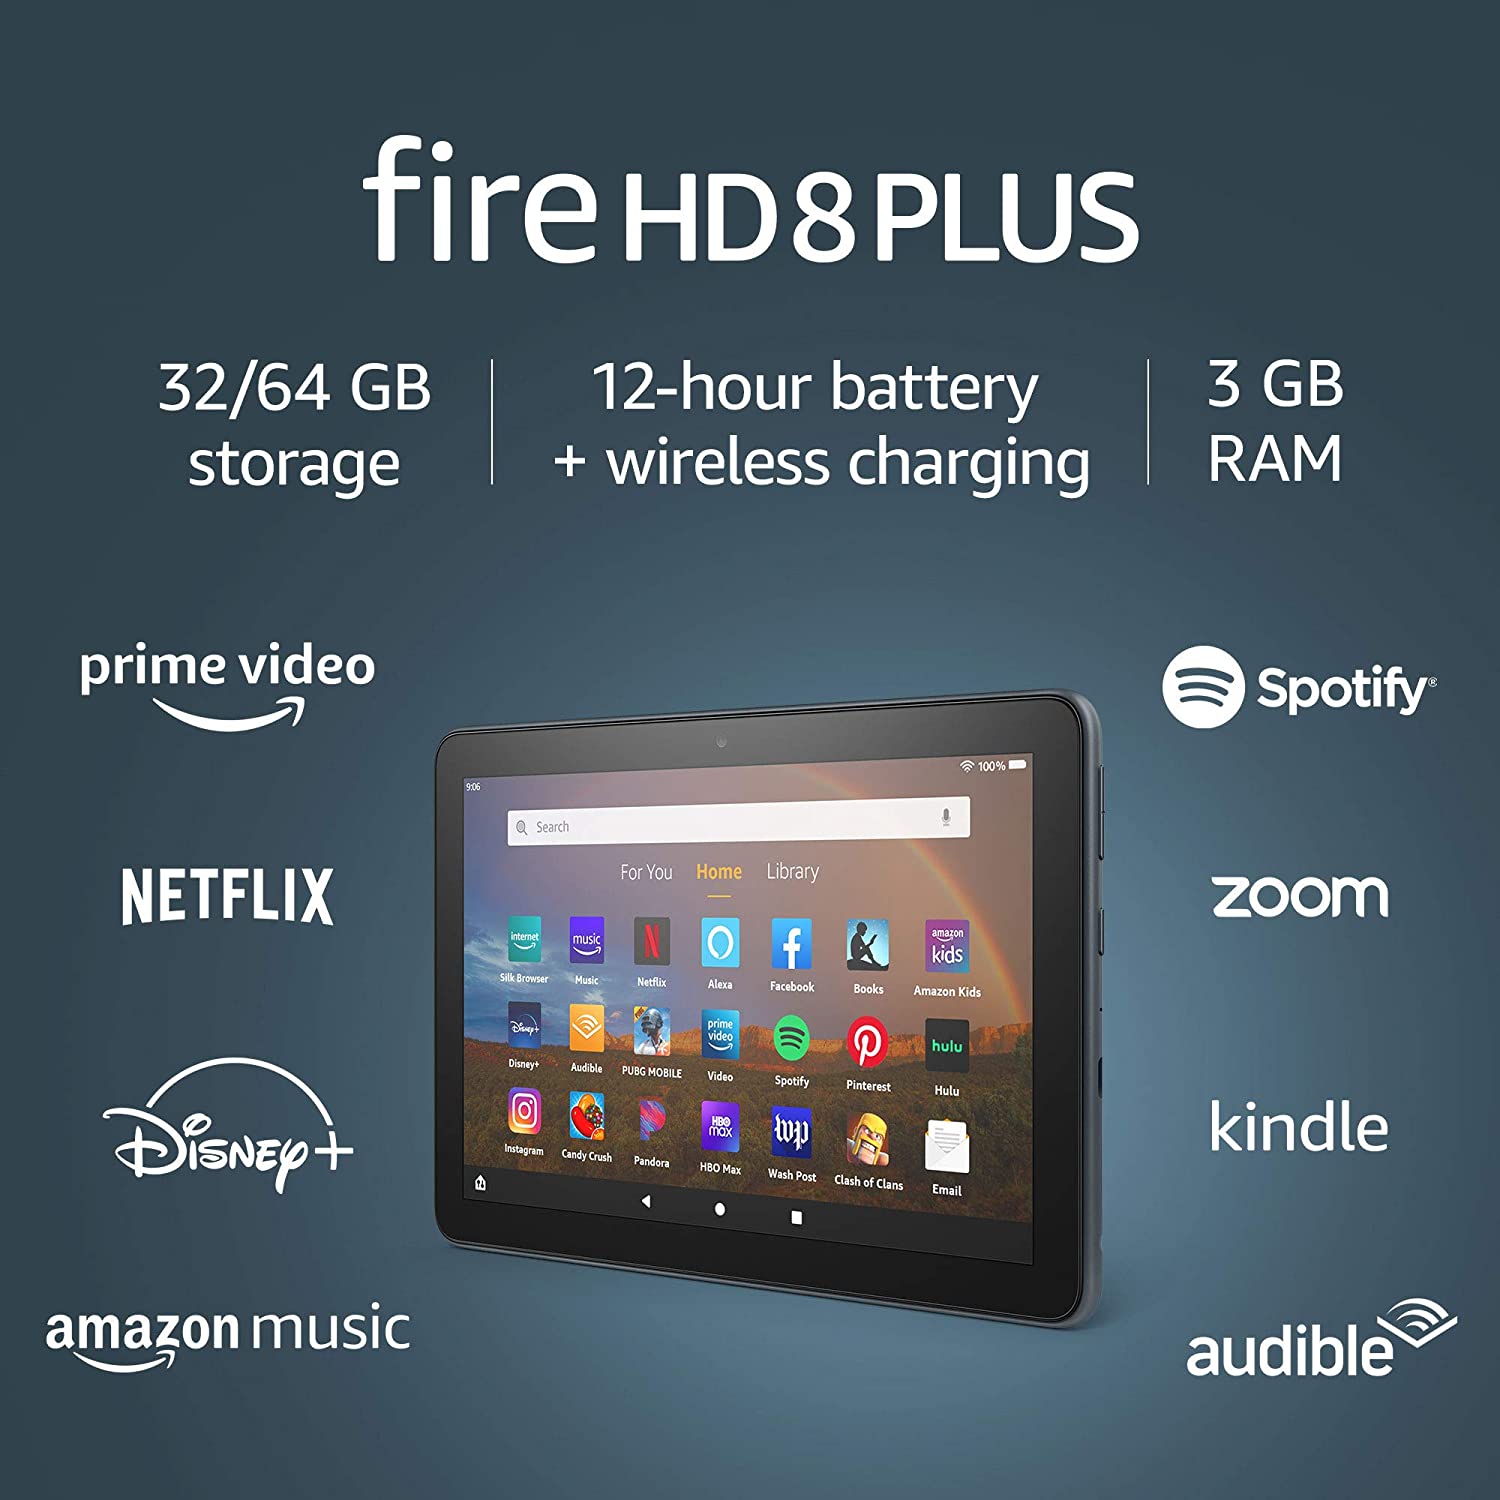 Fire HD 8 Tablet features